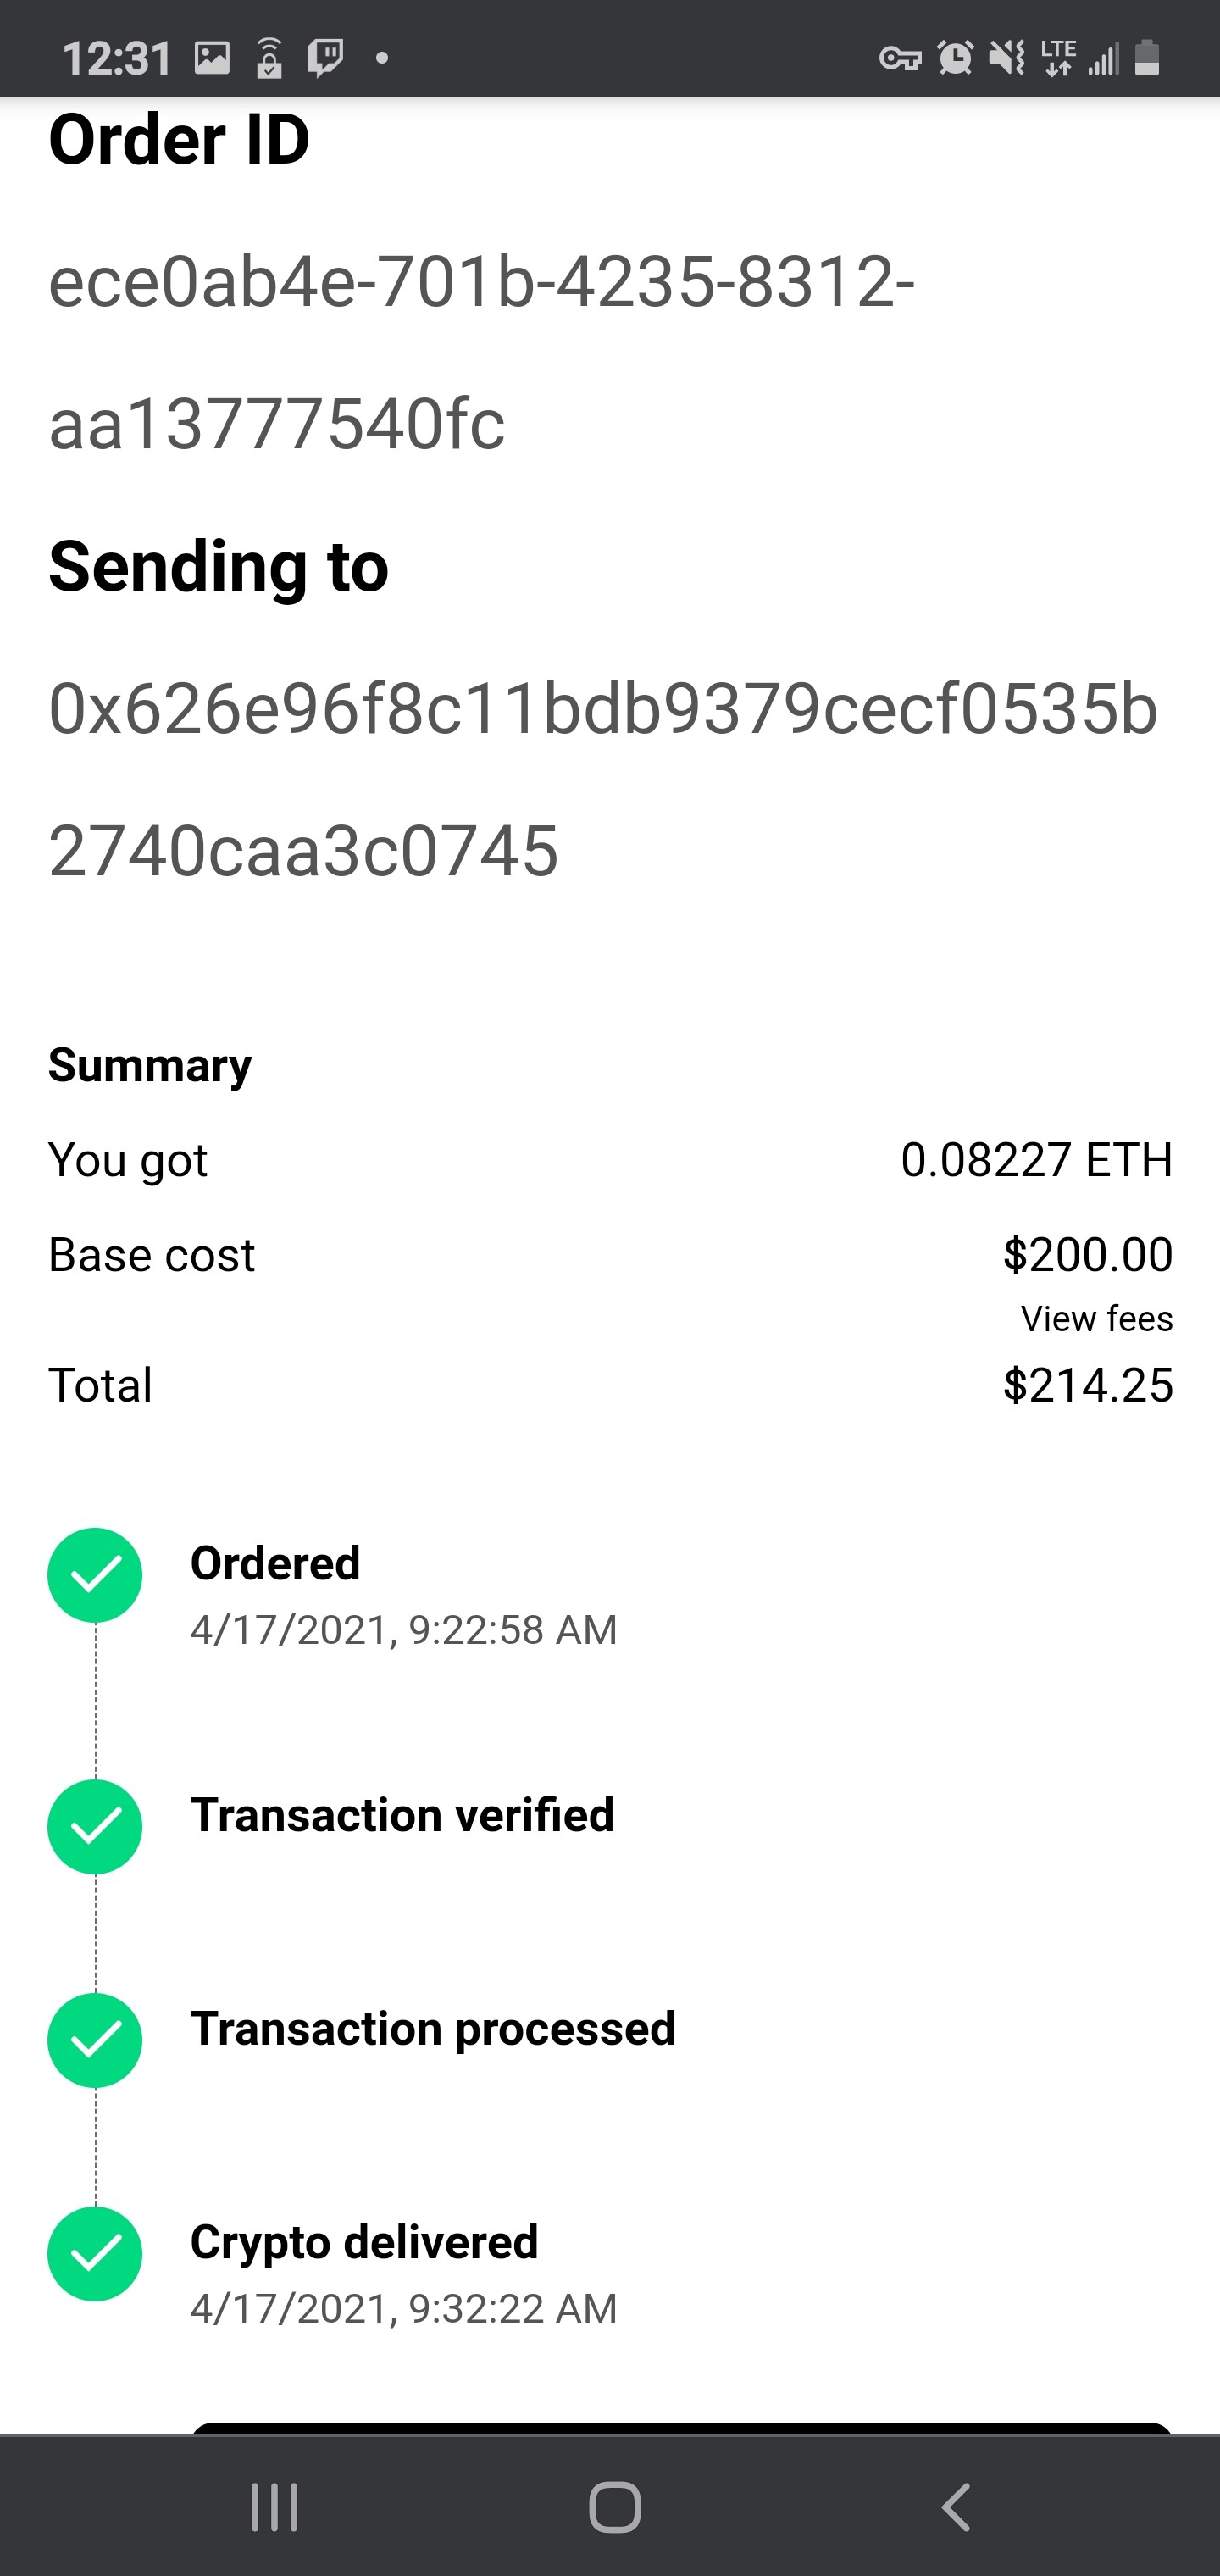 Wallet That Bought 2,365 ETH for $730 Wakes Up After 7.7 Years - DailyCoin